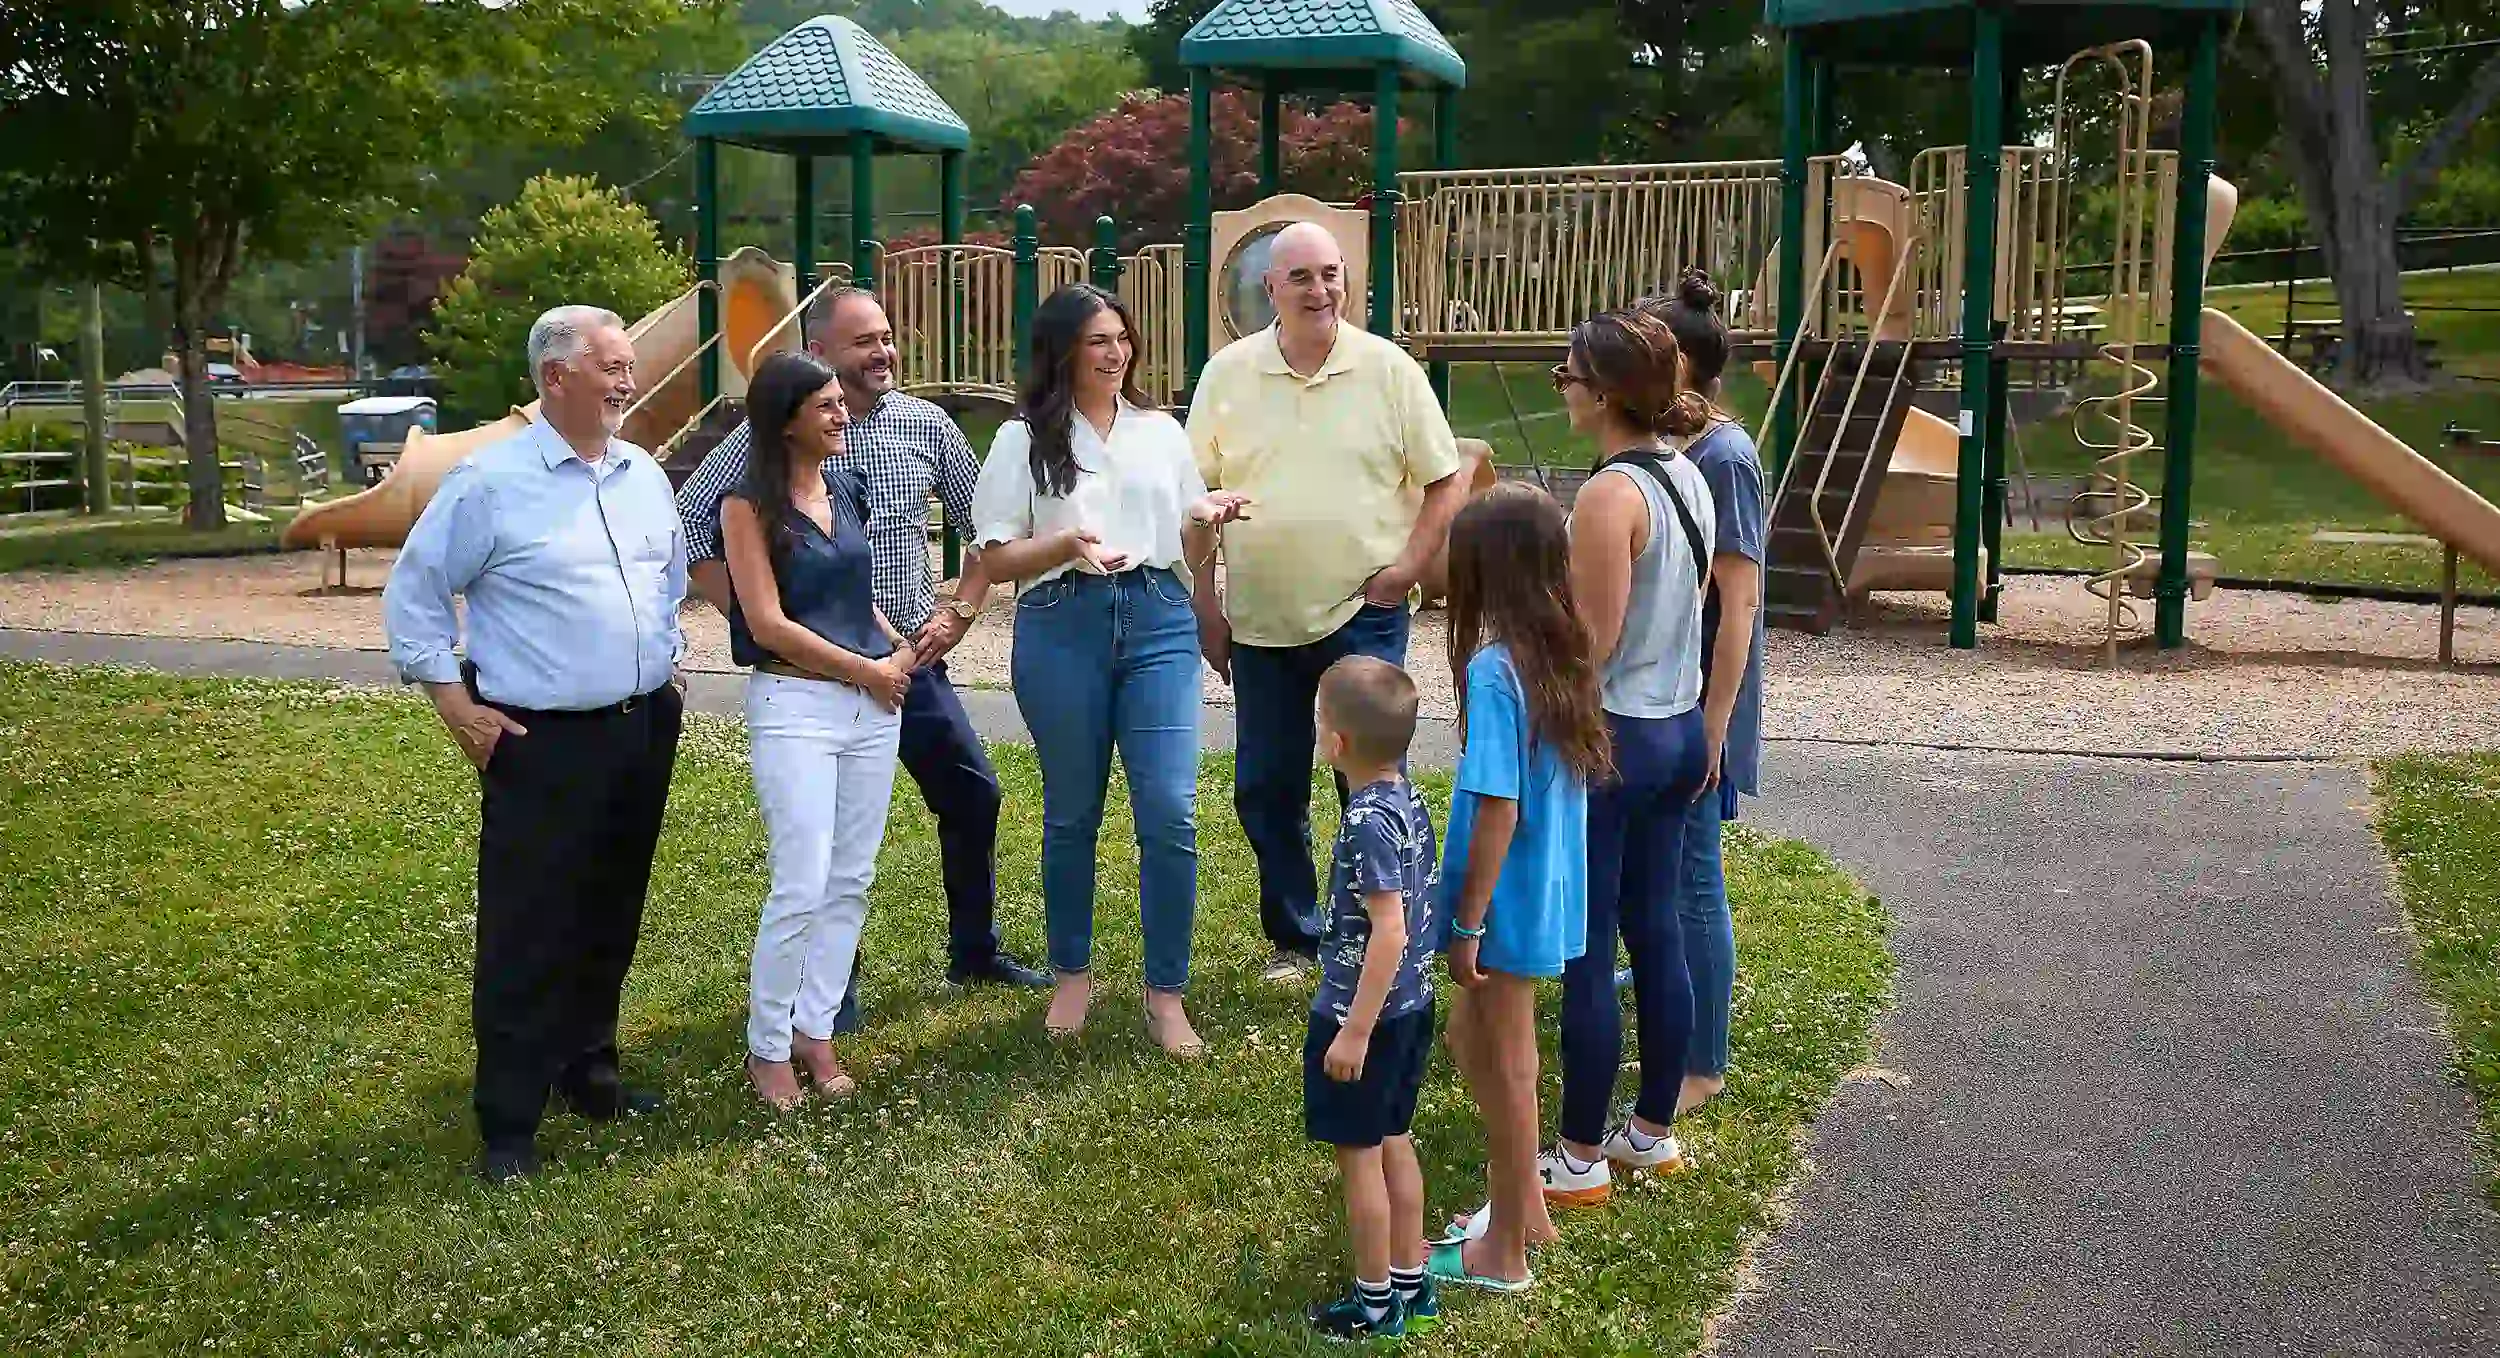 2023 Republican Candidates interacting with family at local playground